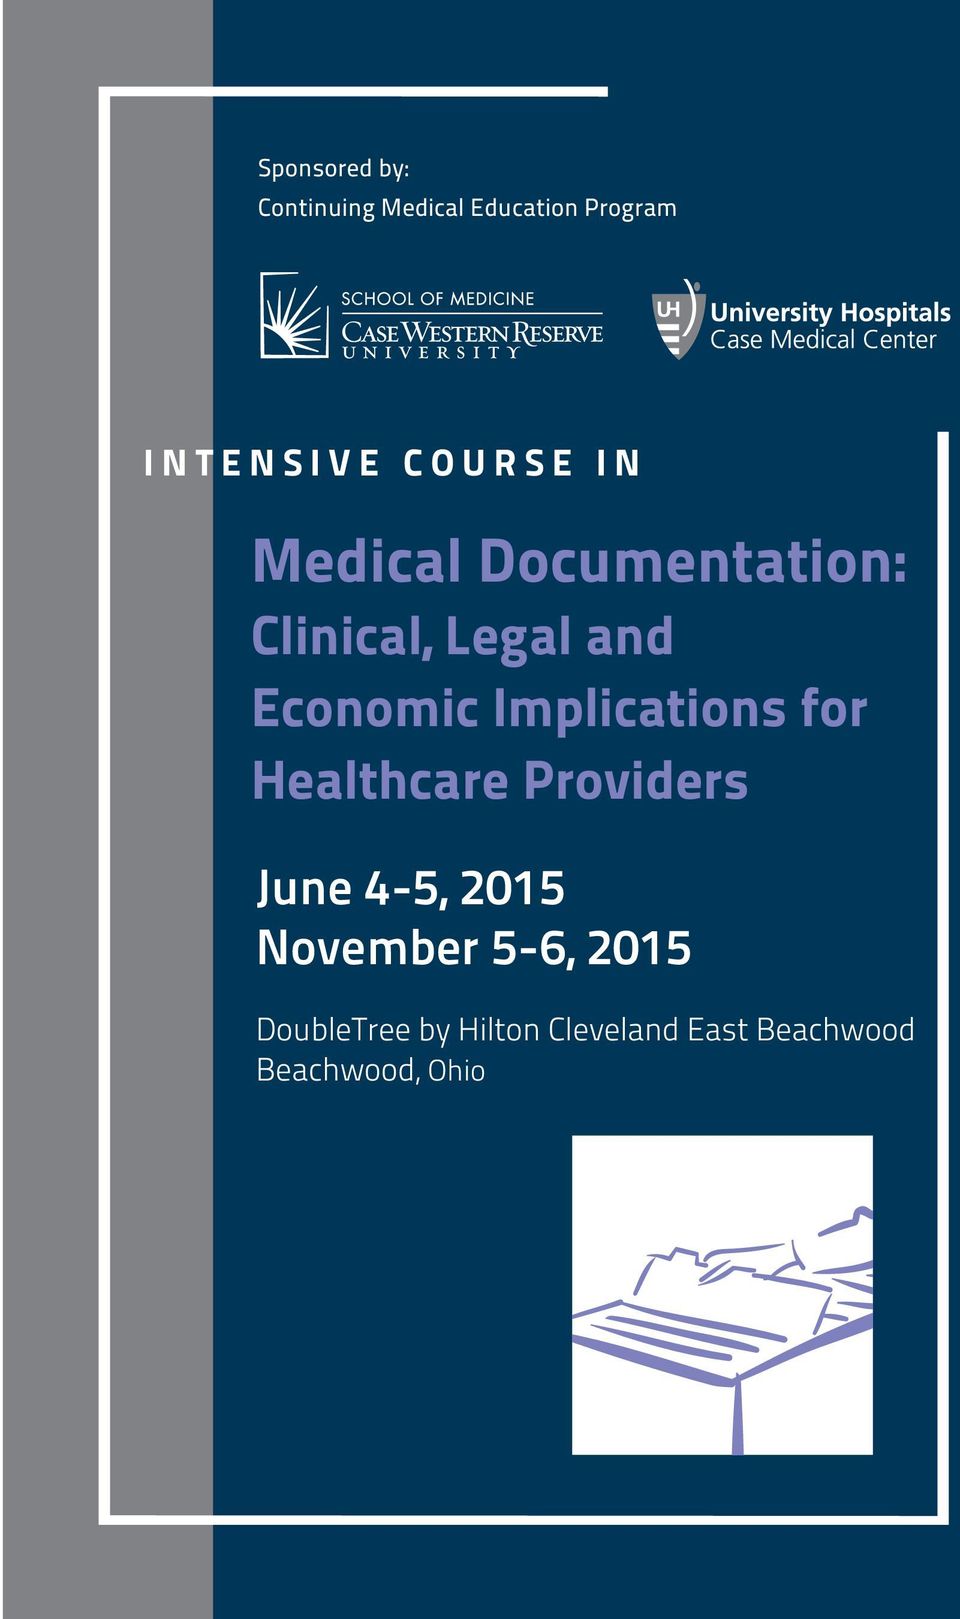 Implications for Healthcare Providers June 4-5, 2015